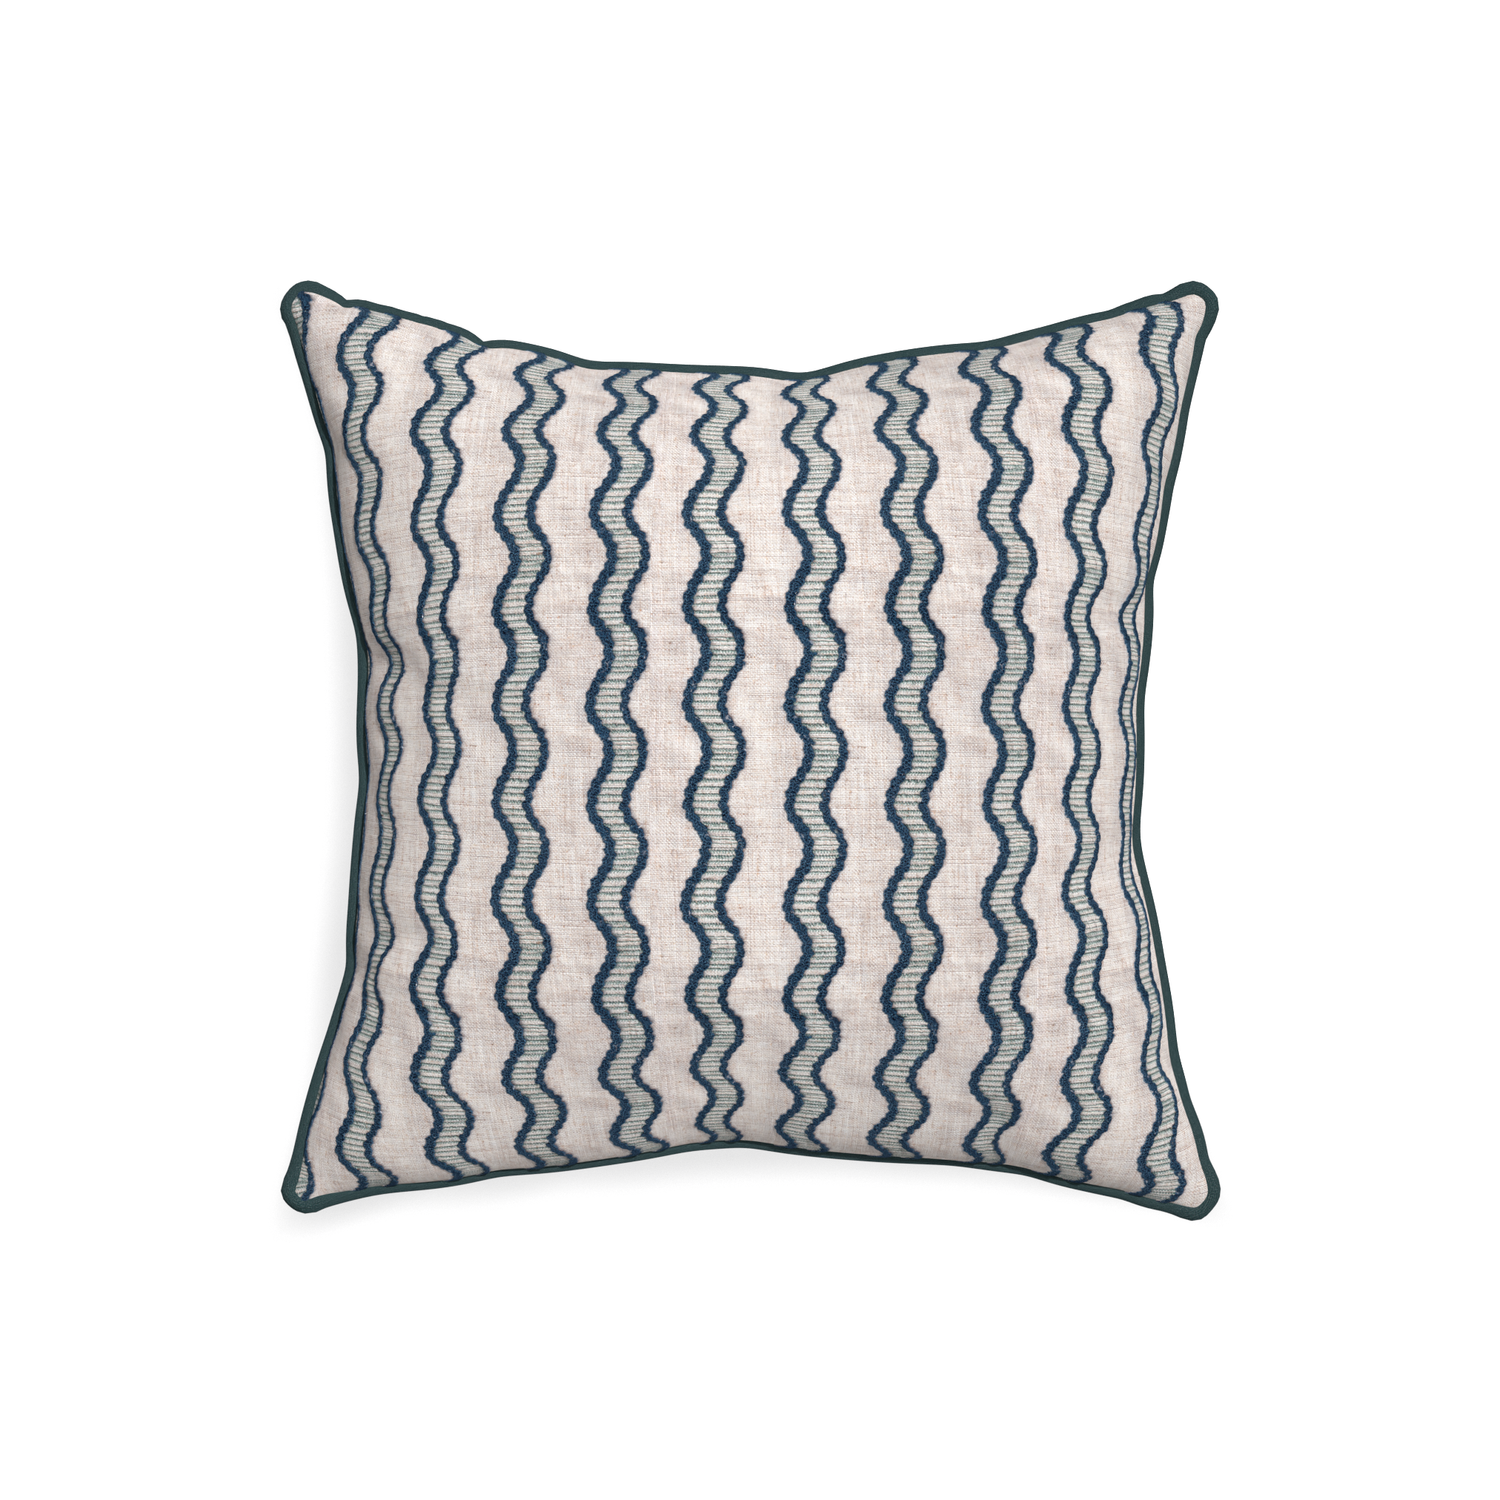 20-square beatrice custom embroidered wavepillow with p piping on white background